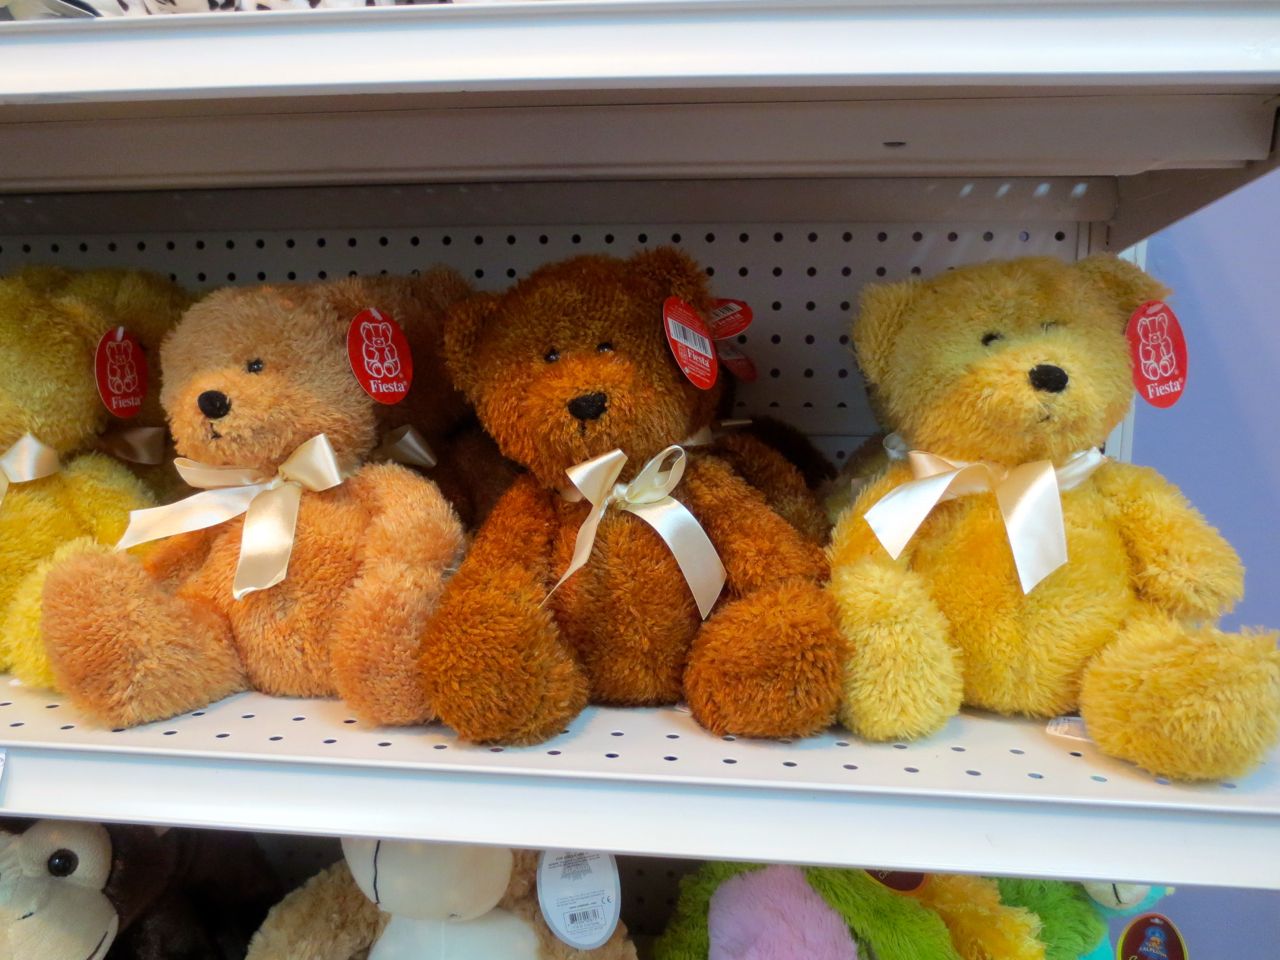 Gifts for little ones: bears - at From Me To You c/o Big Brothers Big Sisters of South Texas | San Antonio Charter Moms